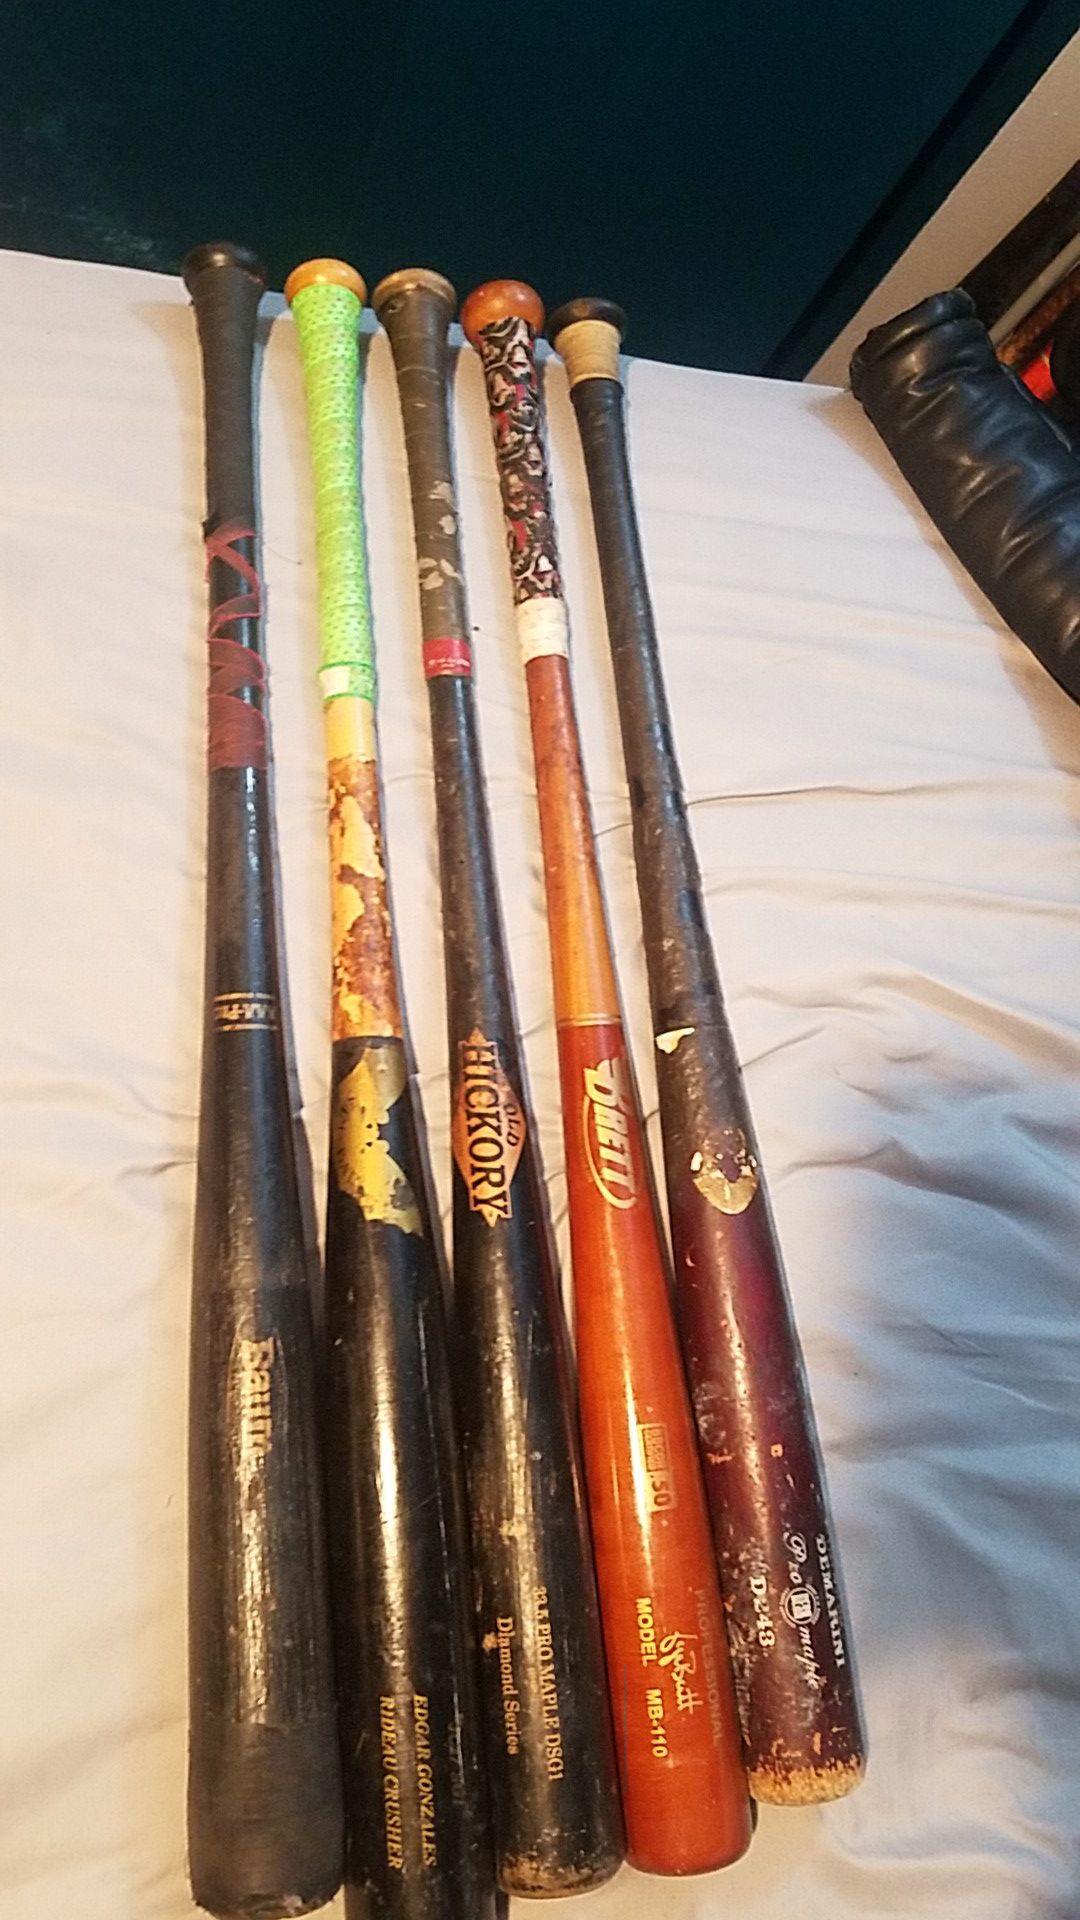 Baseball Bats for the low